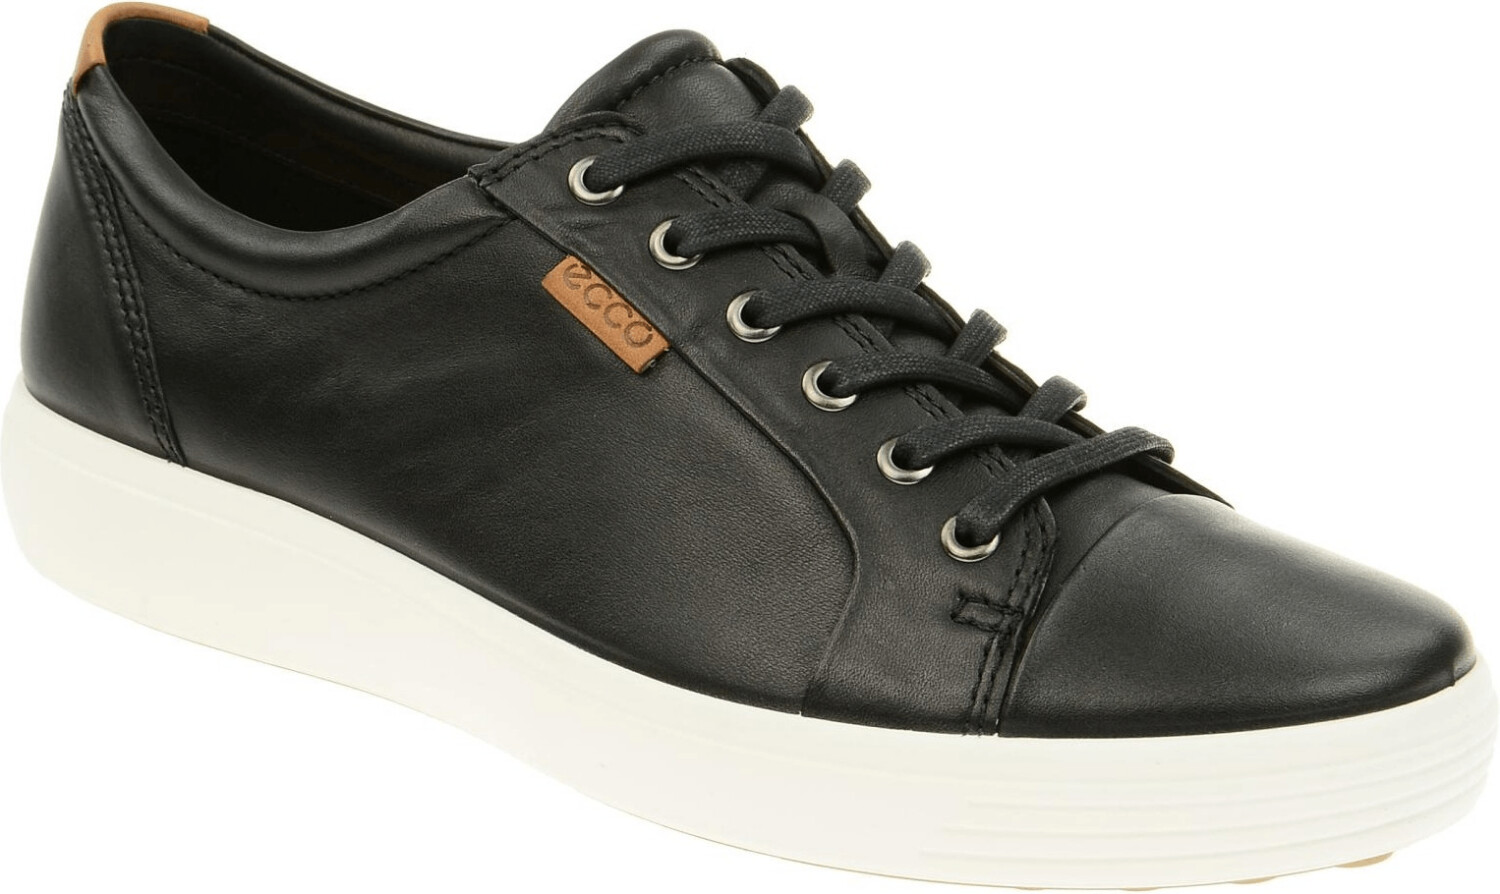 Buy Ecco Soft 7 black from £68.89 (Today) – Best Deals on idealo.co.uk